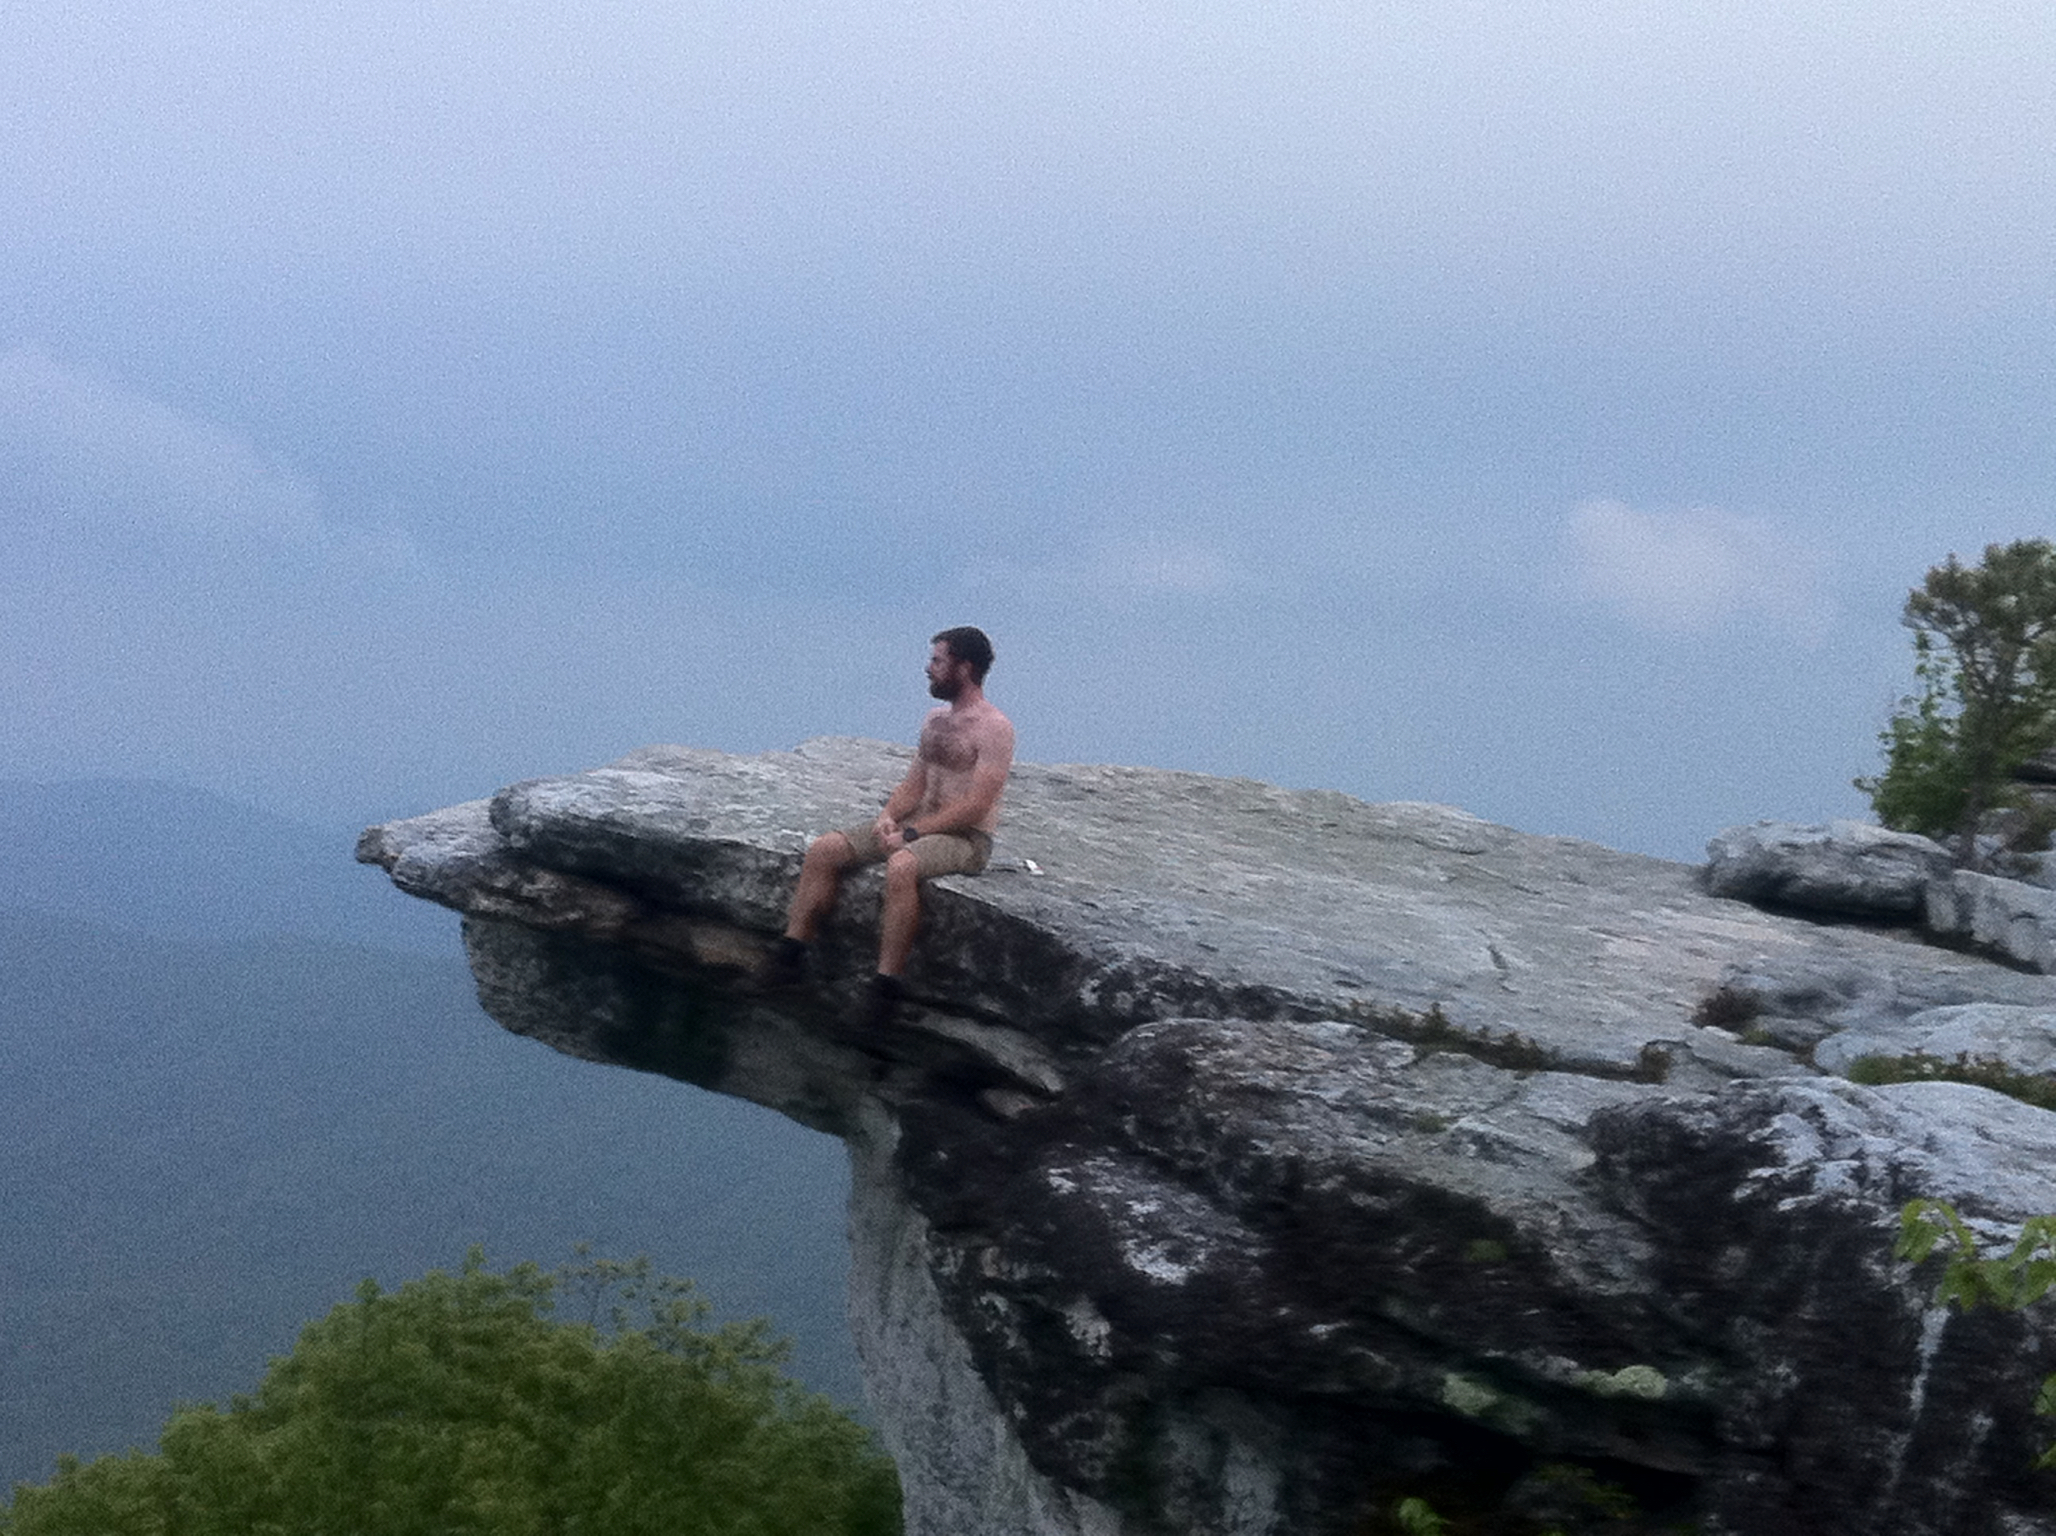 Badger sits on the rocky ledge of McAfee Knob. He's shirtless and sis feet are dangling off the side into the open air below. 